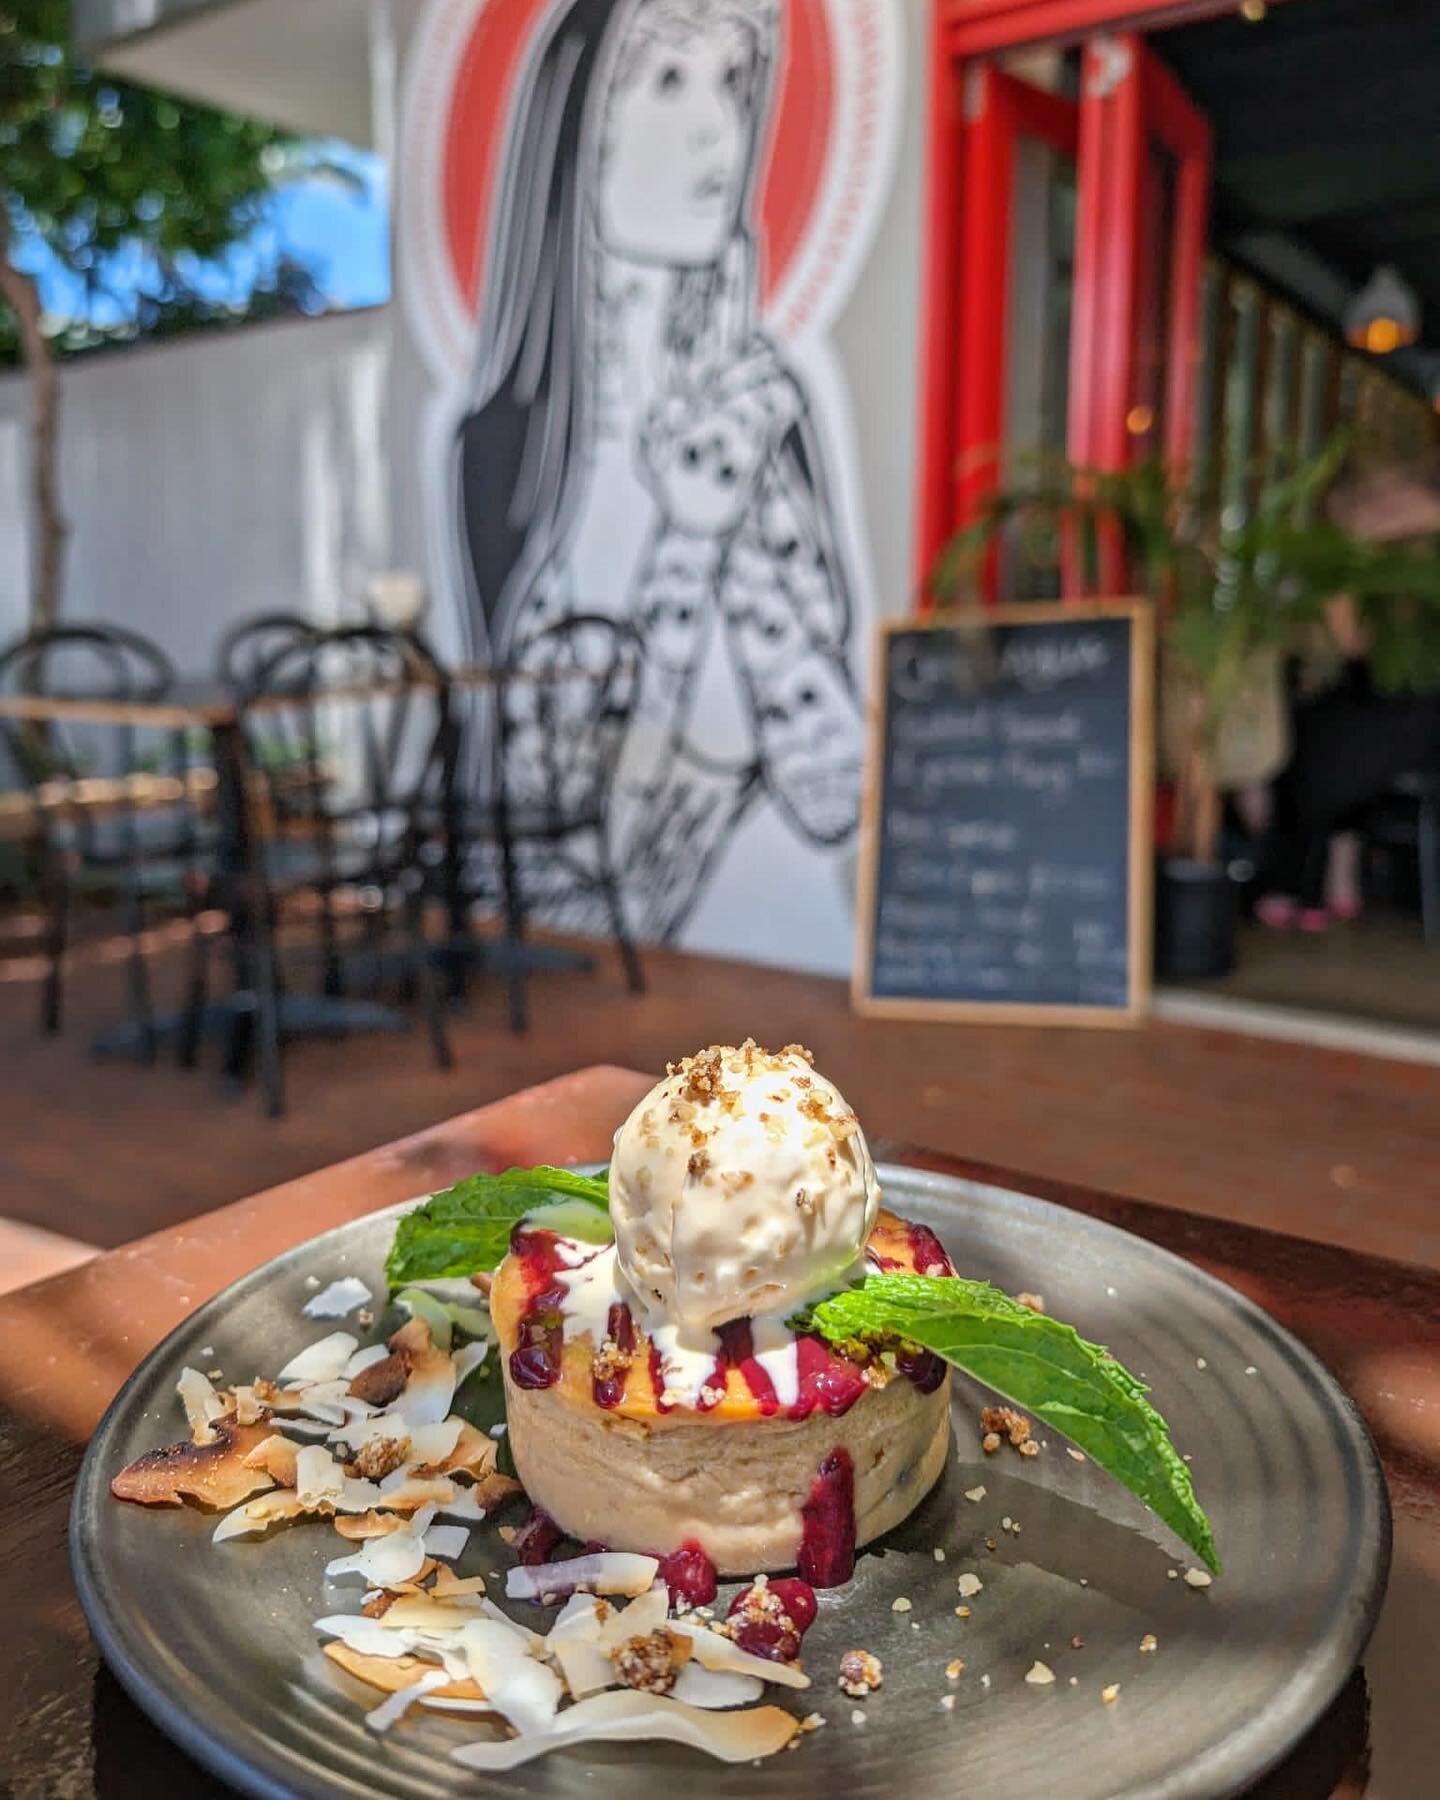 Mexican Cake Special made with sweet potato and served with berry coulis, ice cream, coconut flakes and pralines. 

#chihuahuabyron #byronbaymexican #byrontacos